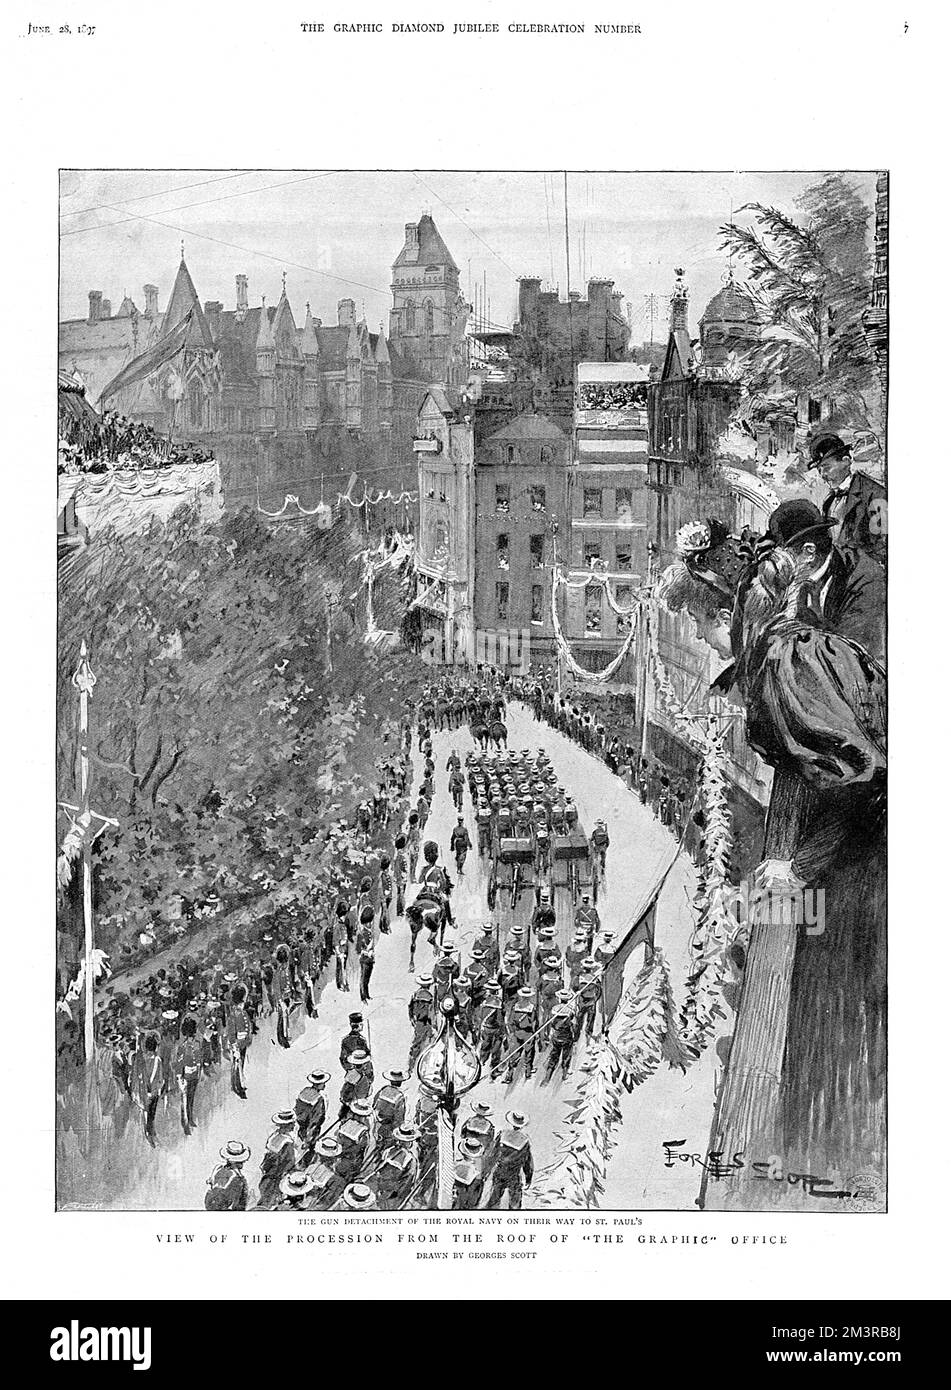 Aerial view from the roof of The Graphic office of Queen Victoria's Jubilee Celebrations on 20 June 1897, with the gun detachment of the Royal Navy passing through on their way to St Paul's Cathedral.      Date: 20 June 1897 Stock Photo